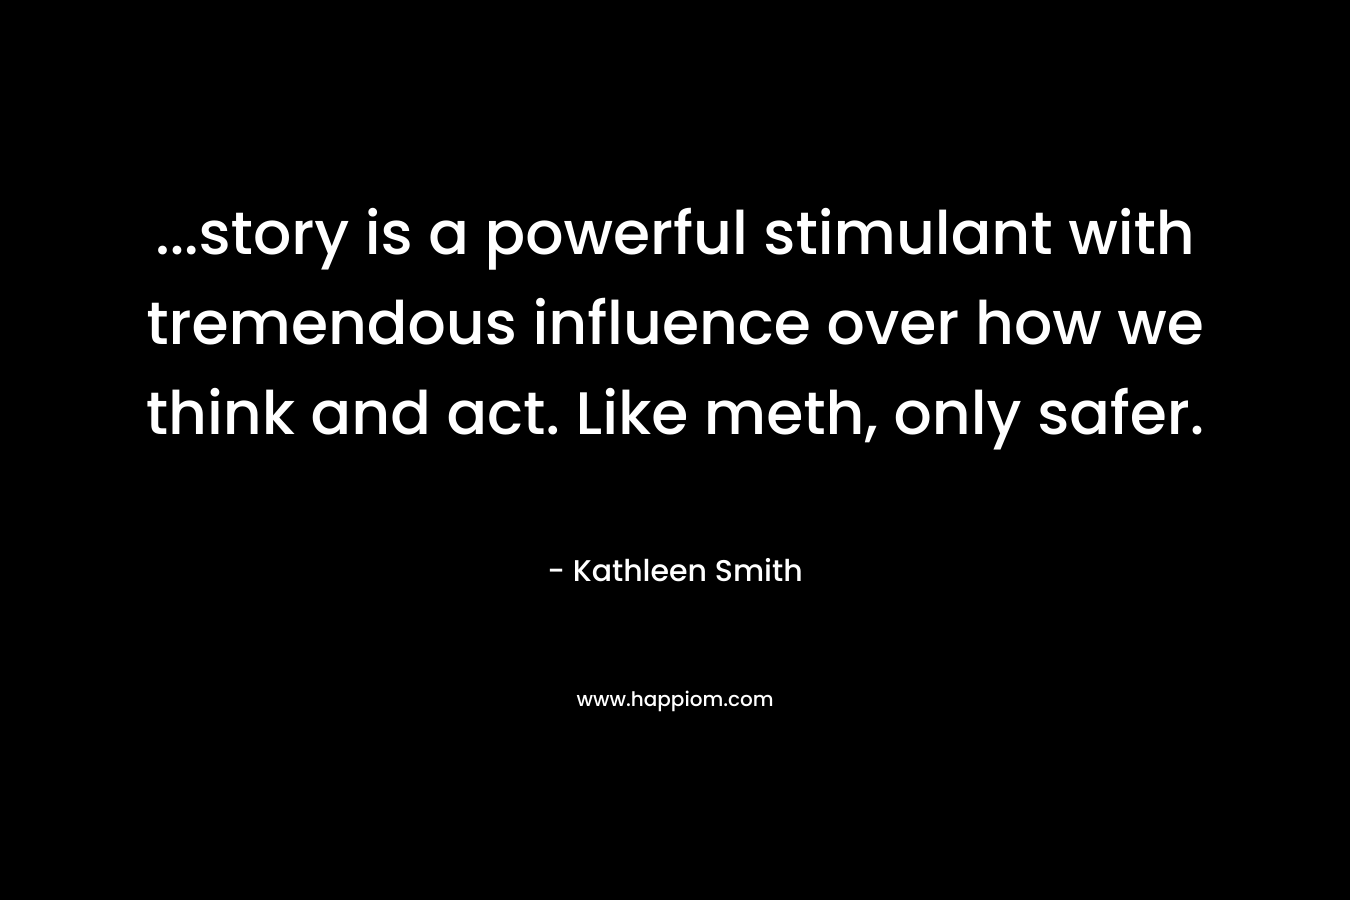 …story is a powerful stimulant with tremendous influence over how we think and act. Like meth, only safer. – Kathleen Smith